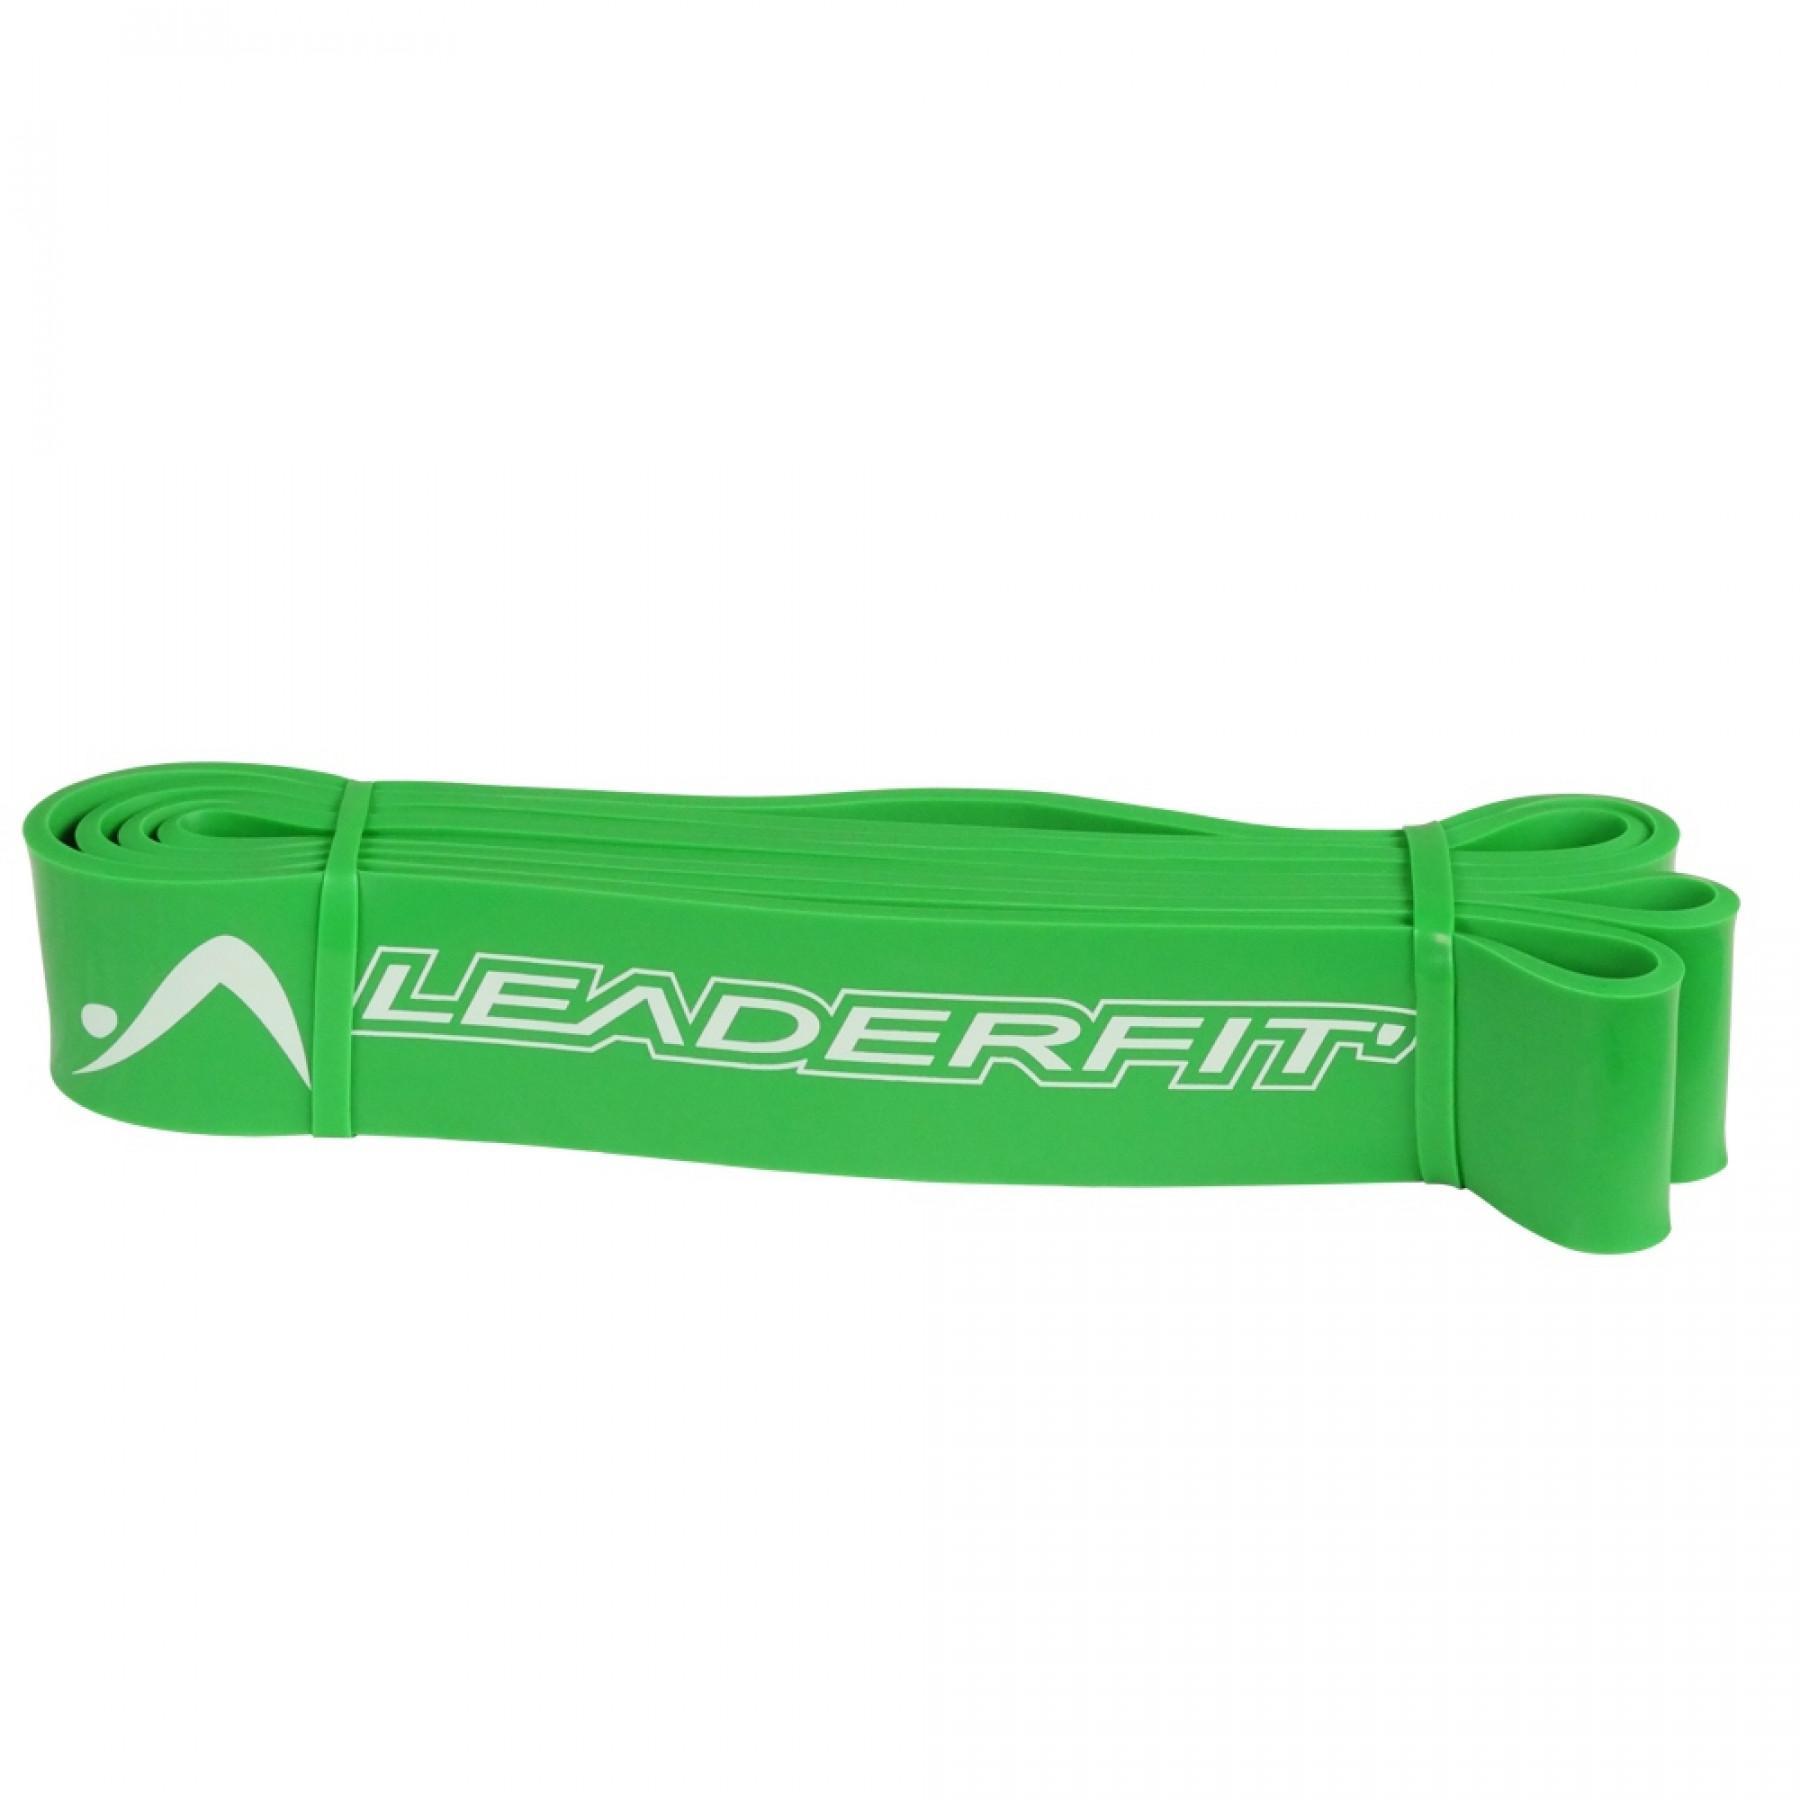 Elastisches Band Leader Fit Power bands strong